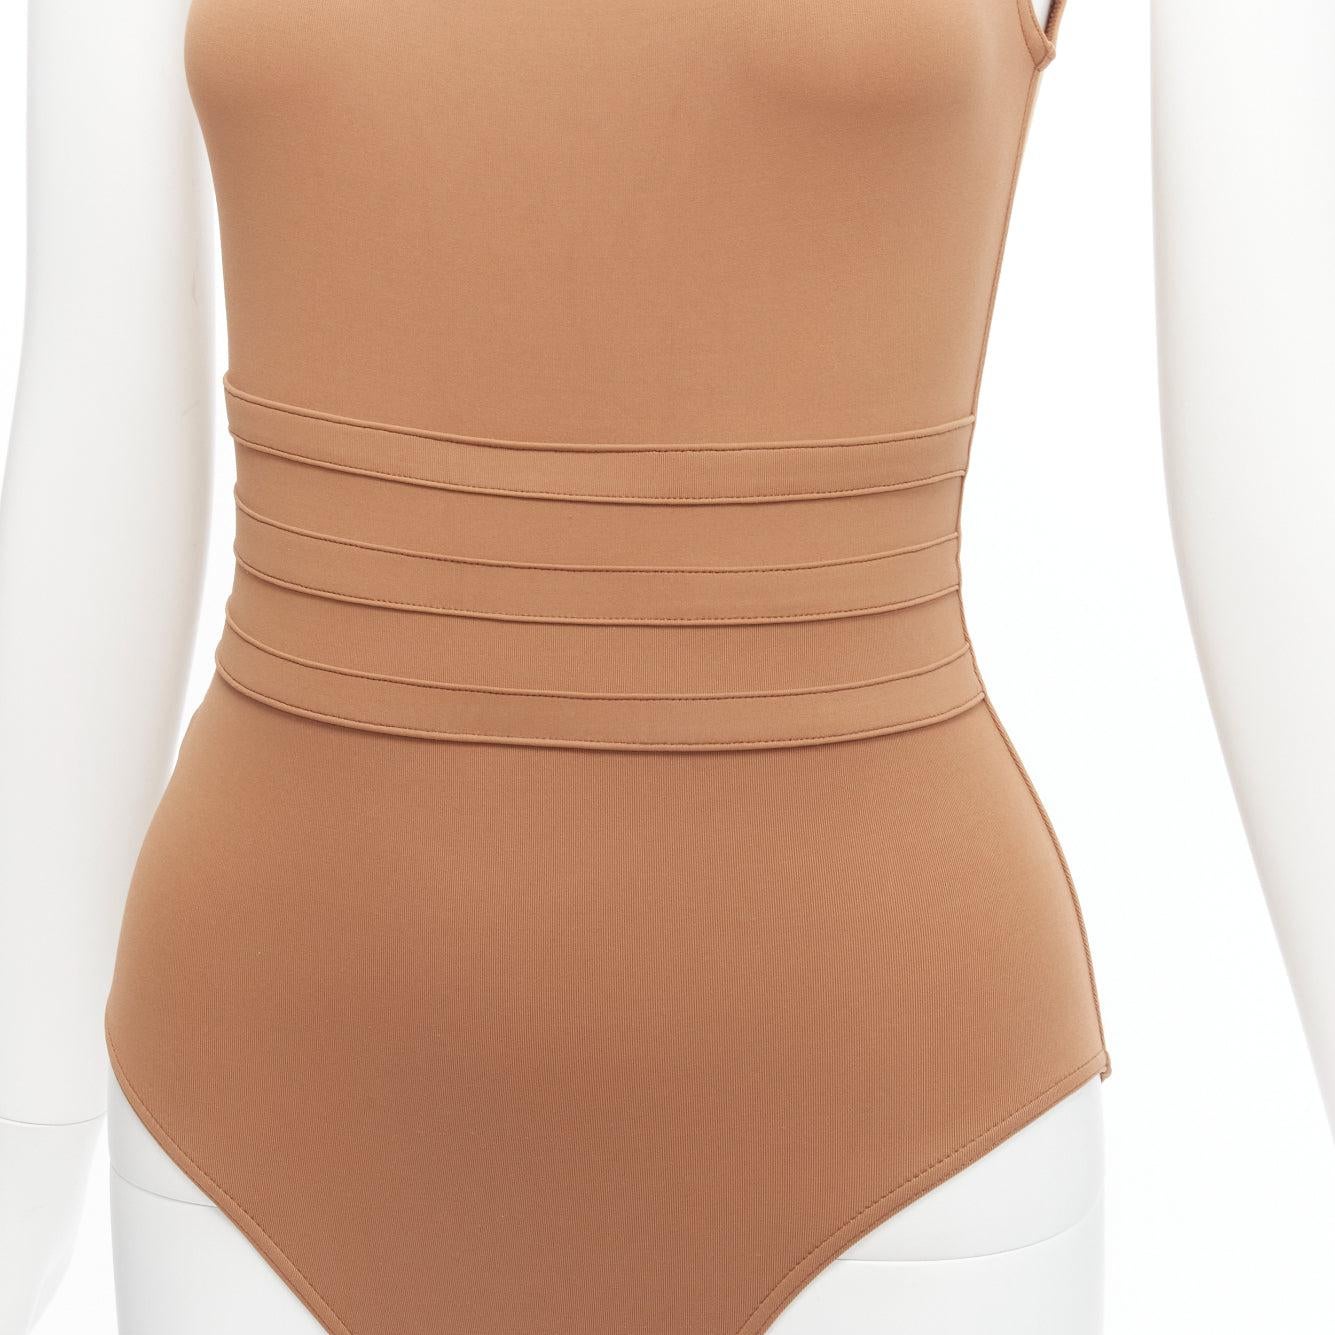 new ERES Asia Duni brown panel waist backless one piece swimsuit IT38 XS
Reference: SNKO/A00364
Brand: Eres
Model: Asia Duni
Material: Polyamide, Elastane
Color: Brown
Pattern: Solid
Closure: Pullover
Extra Details: Backless design.
Made in: